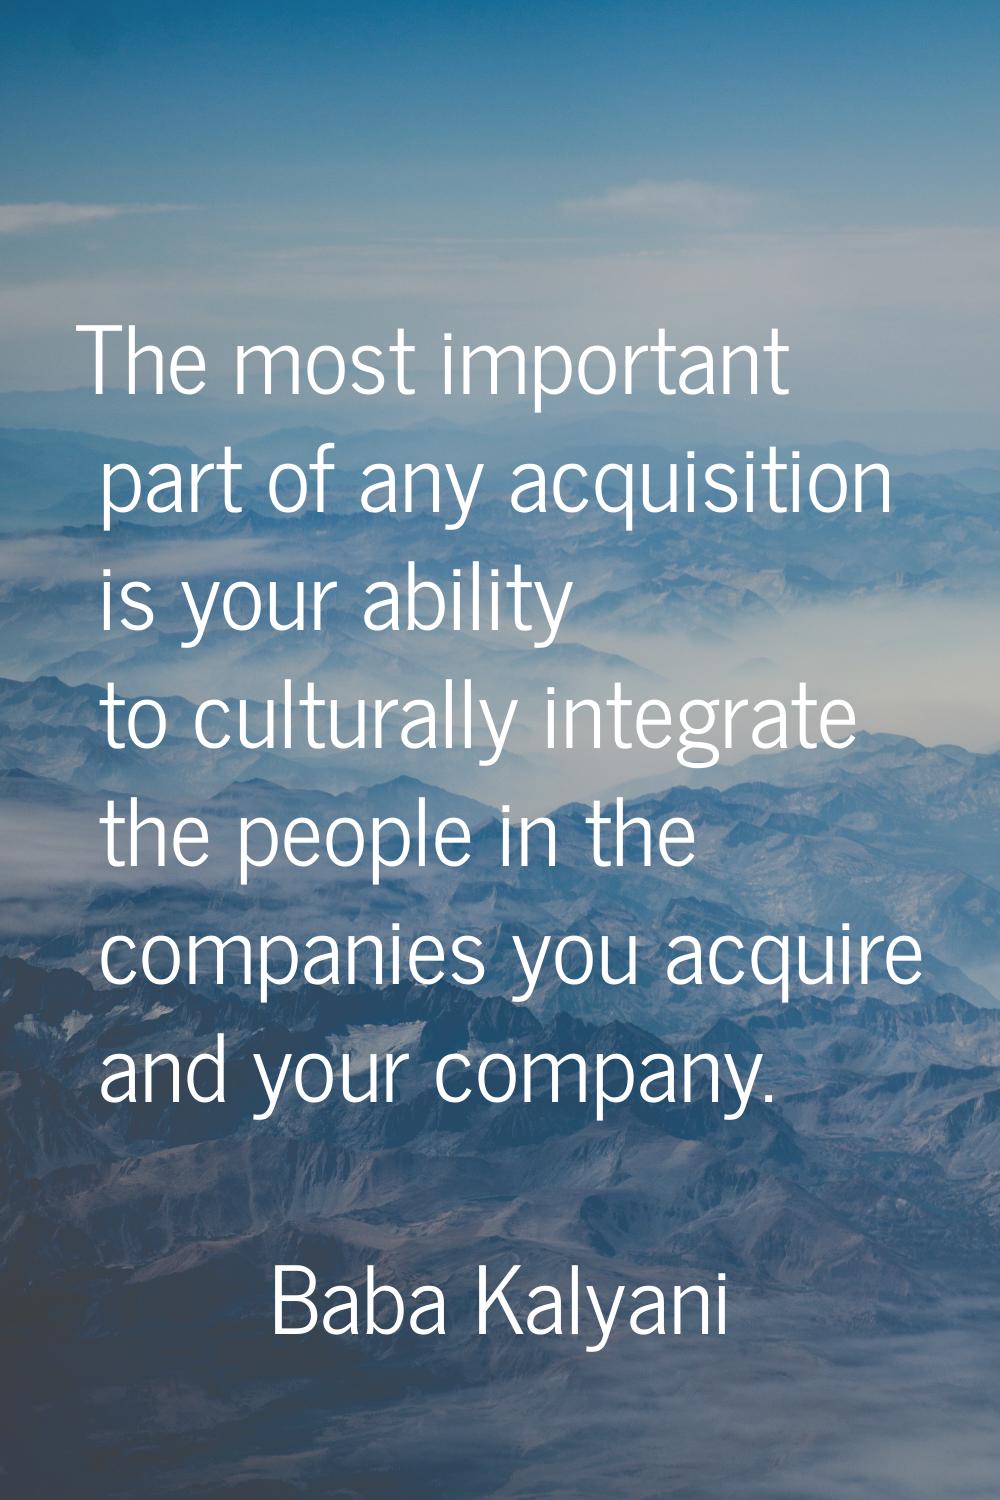 The most important part of any acquisition is your ability to culturally integrate the people in th